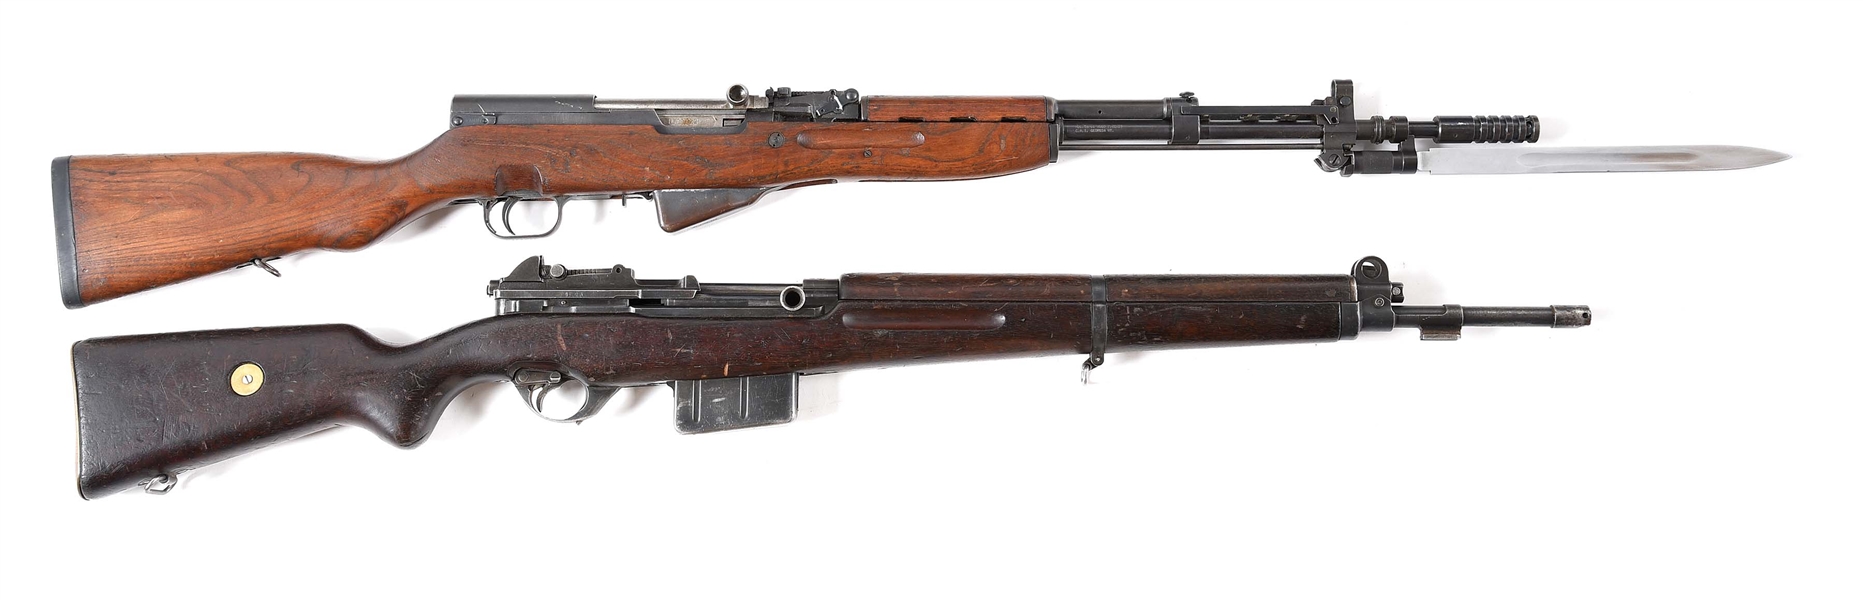 (C) LOT OF 2: YUGO 59/66 AND FN ABL 47 SEMI AUTOMATIC RIFLE.